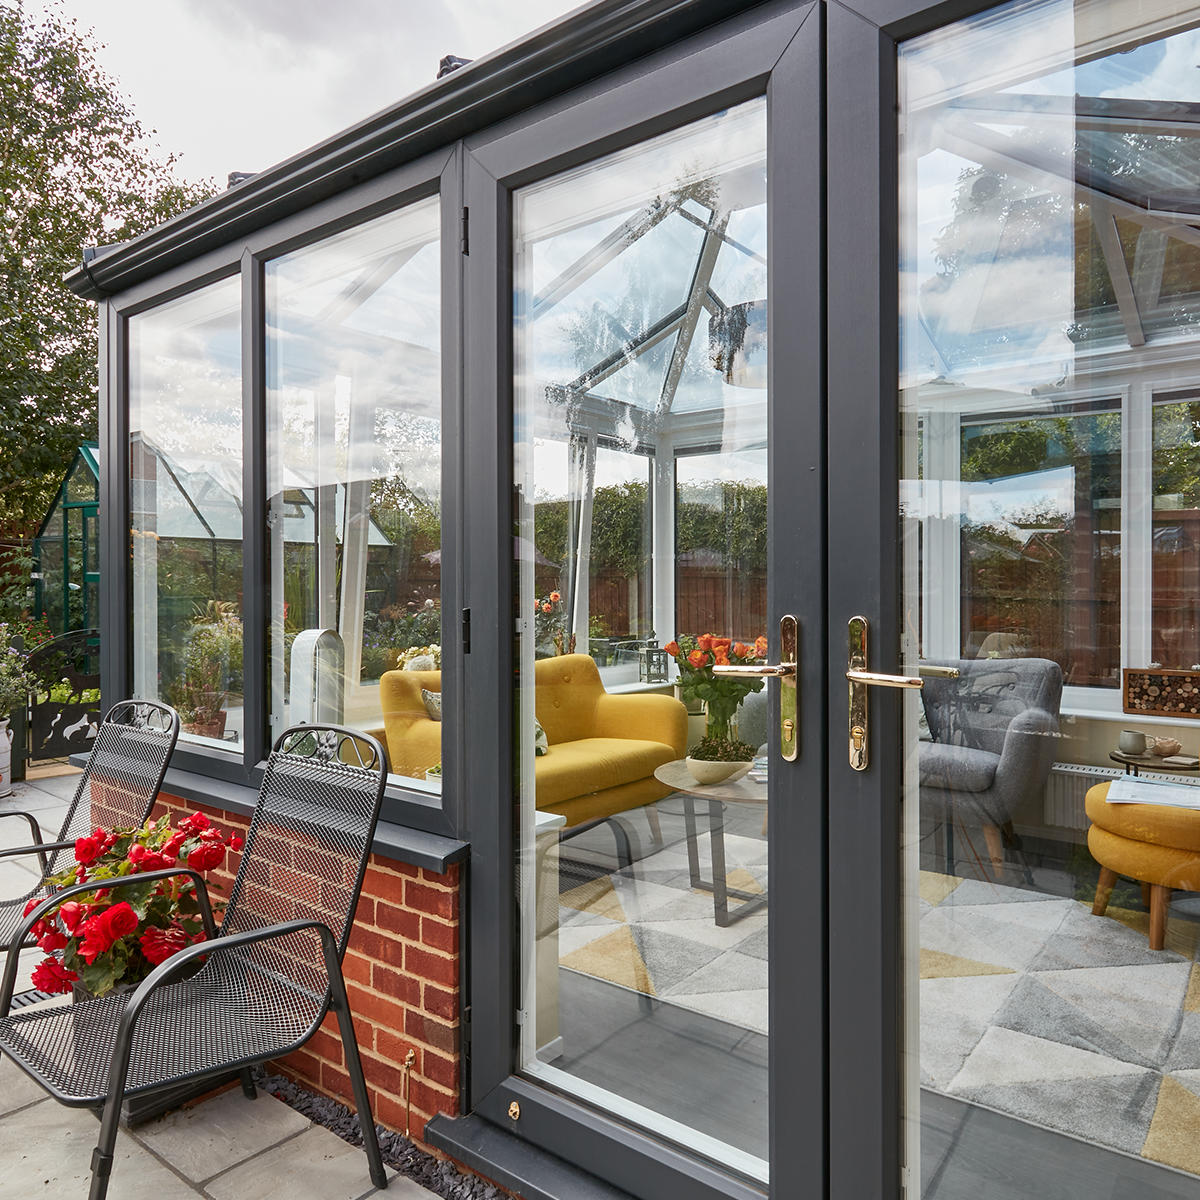 If you are looking to upgrade your existing space or add a new extension, we have a range of modern conservatory styles and colours to choose from. This includes traditional glass, polycarbonate or solid conservatory roof options.